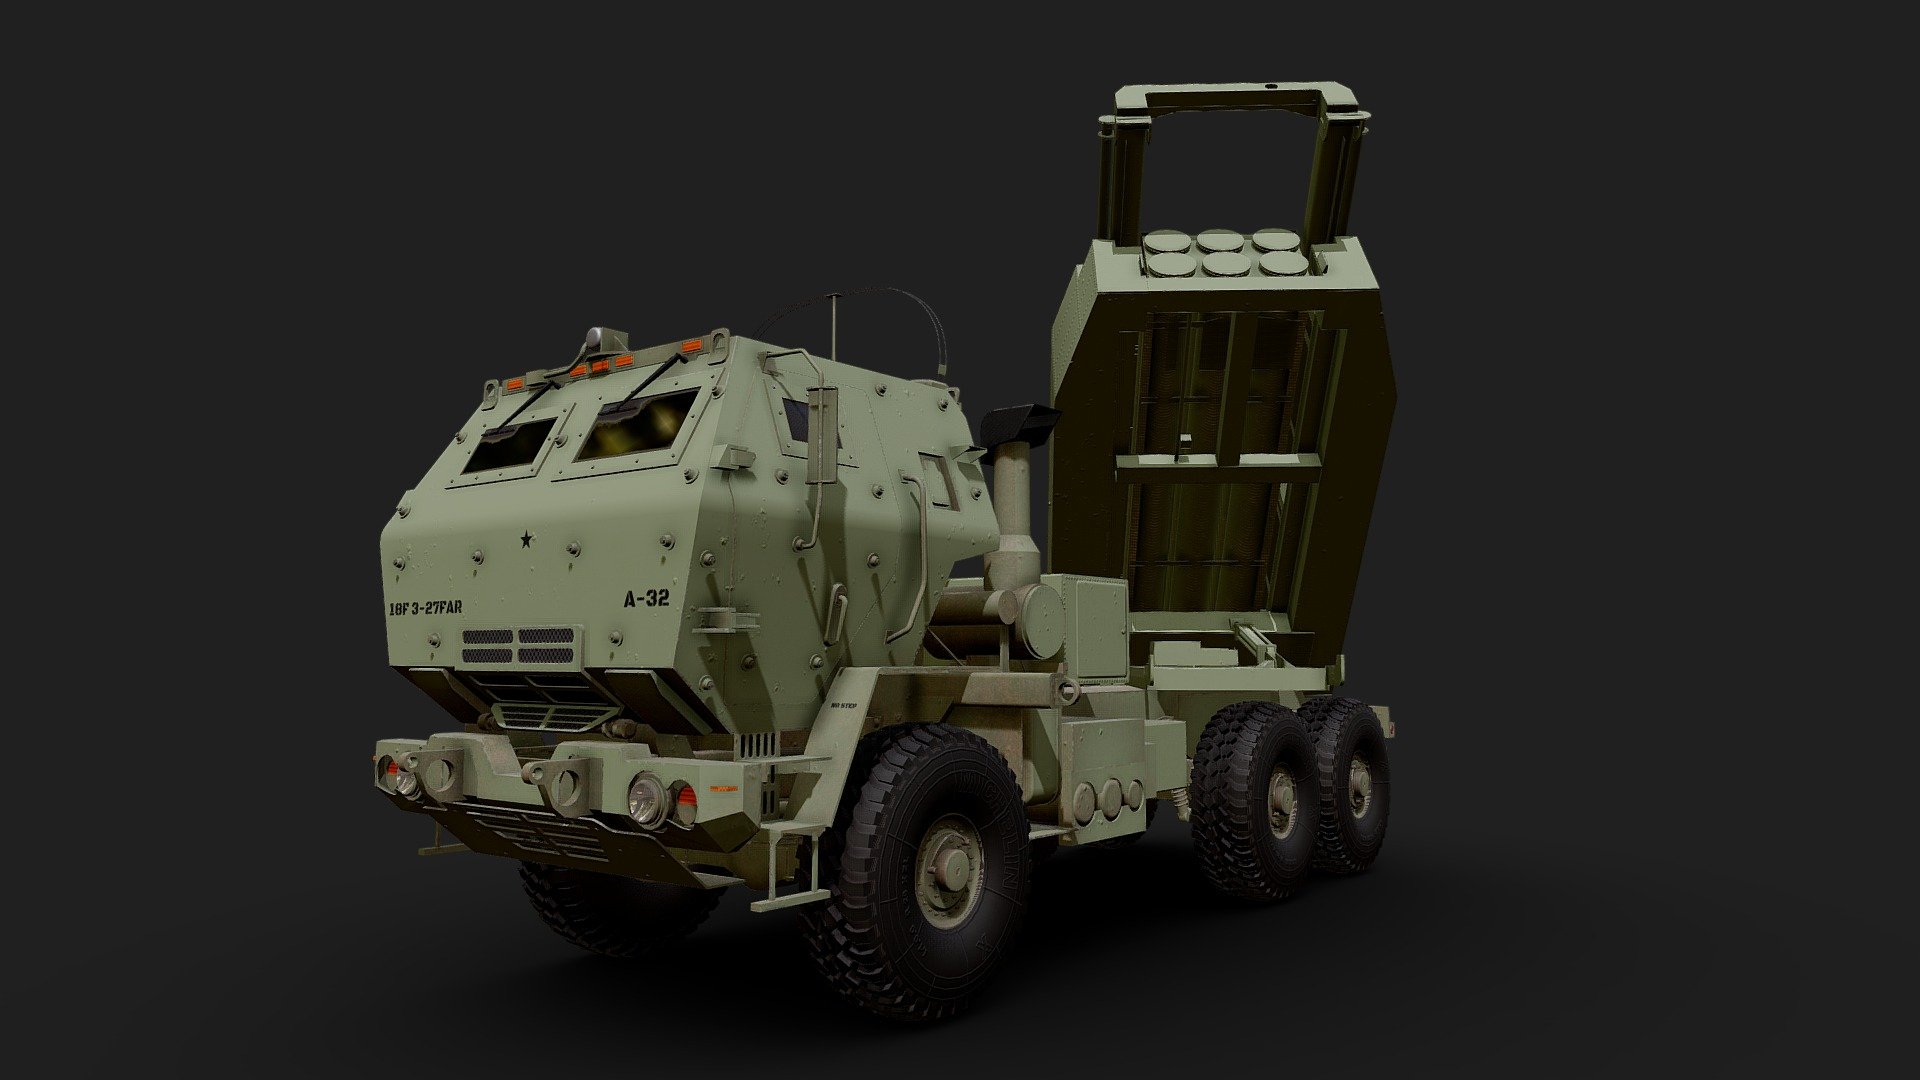 The M142 High Mobility Artillery Rocket System (HIMARS) is a light multiple rocket launcher developed in the late 1990s for the United States Army and mounted on a standard U.S. Army M1140 truck frame.

The M142 carries one pod with either six GMLRS rockets, or two PrSM missiles, or one ATACMS missile on the U.S. Army's new Family of Medium Tactical Vehicles (FMTV) five-ton truck and can launch the entire Multiple Launch Rocket System Family of Munitions (MFOM). M142 ammunition pods are interchangeable with the M270 MLRS; however, it is able to carry only one pod rather than the standard two for the M270 and its variants 3d model